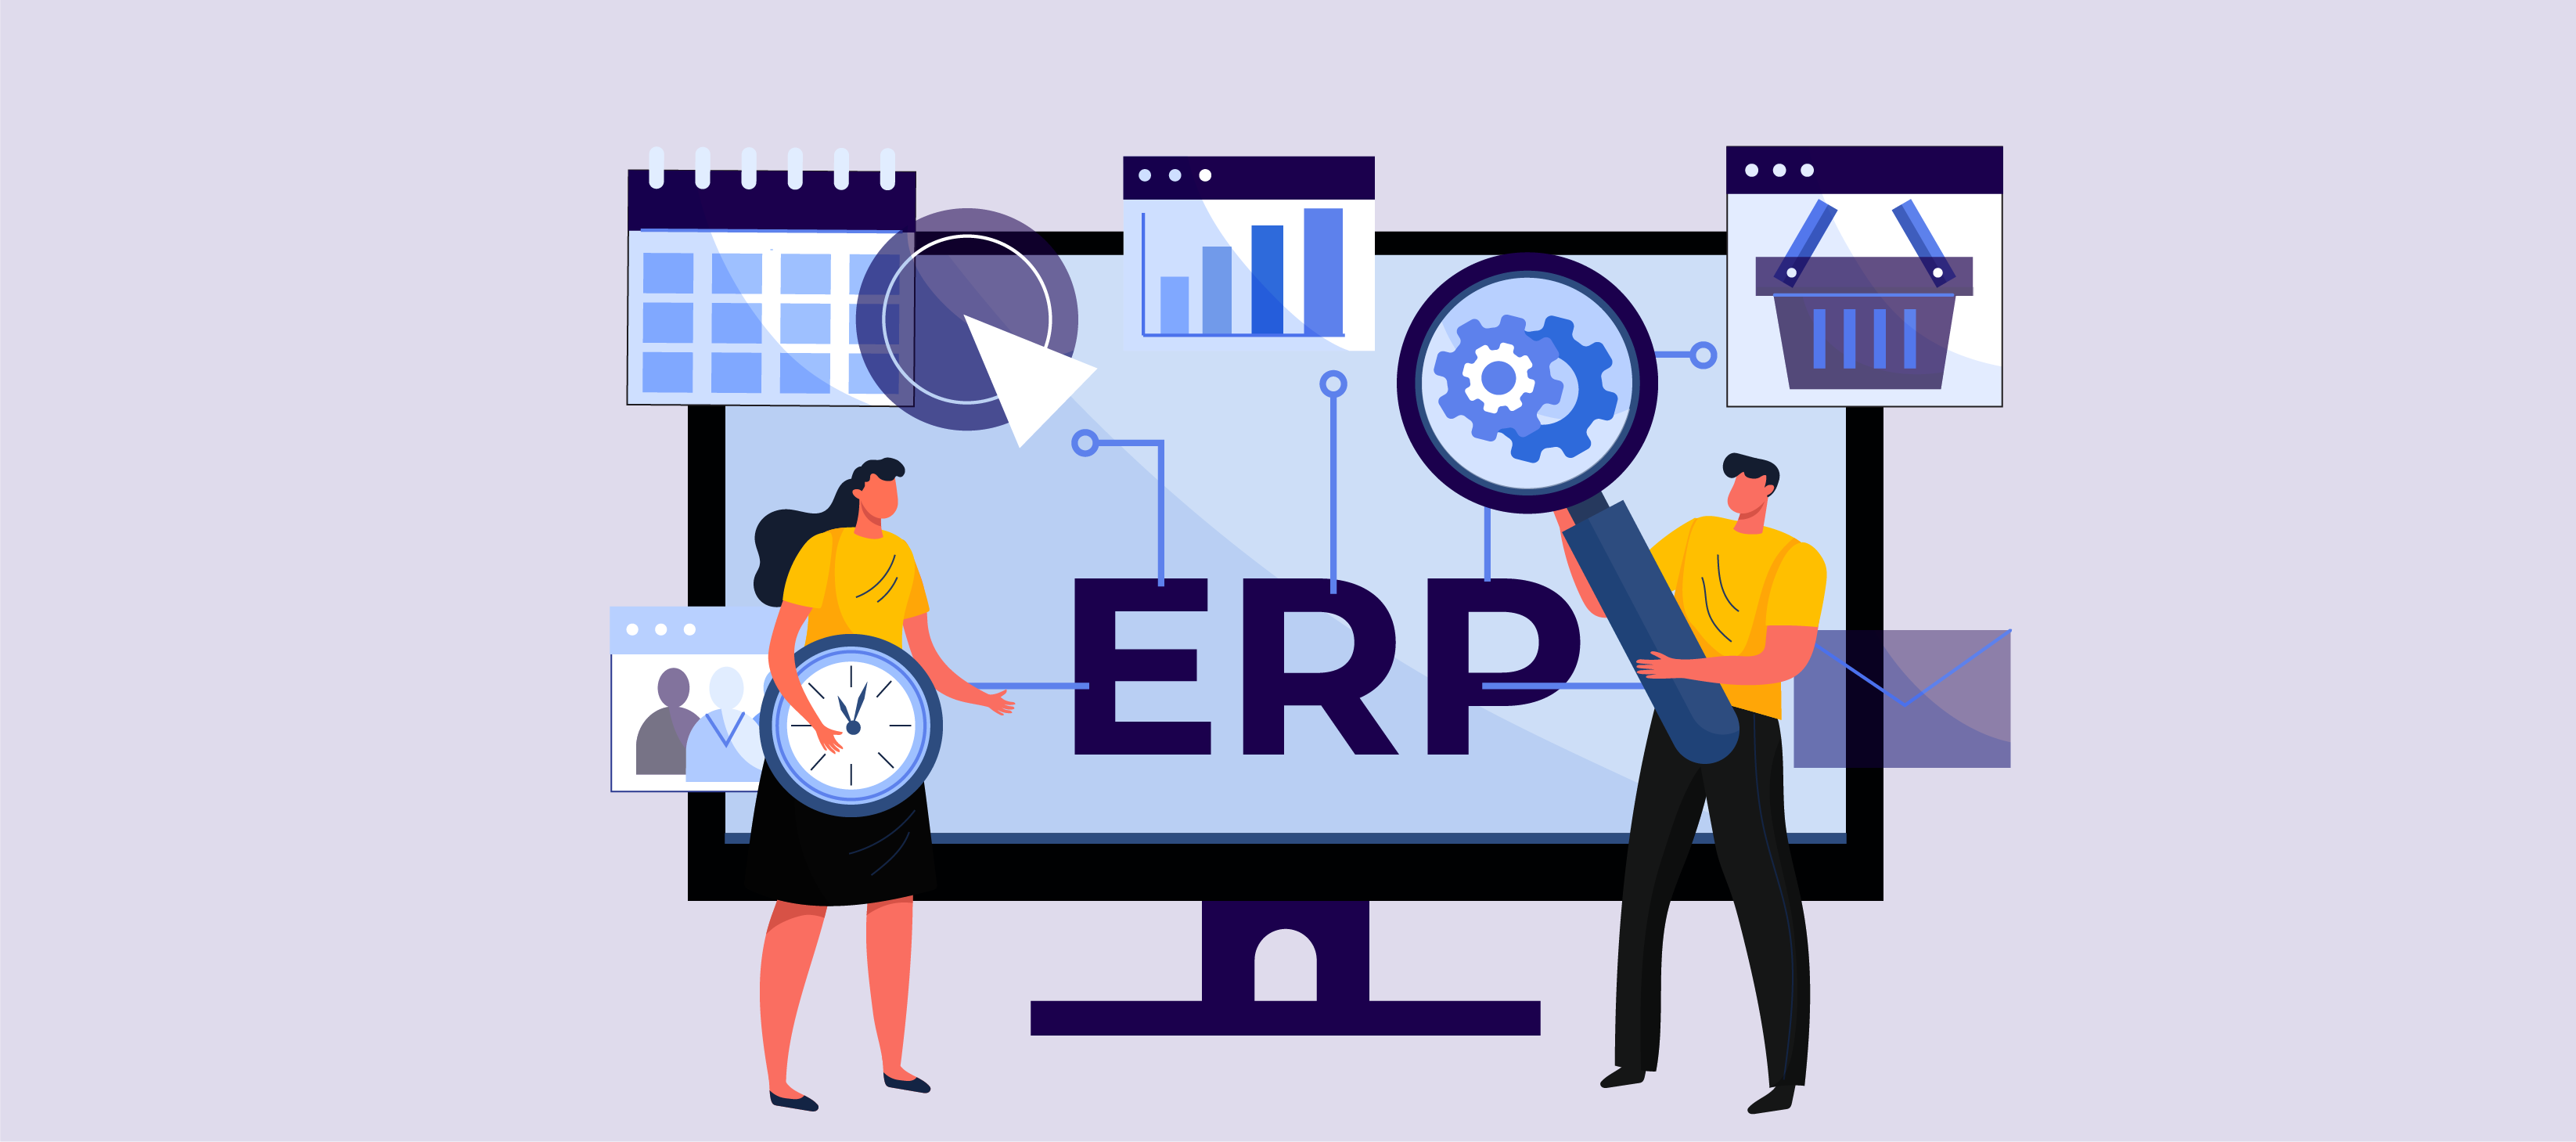 Top 10 examples of erp applications